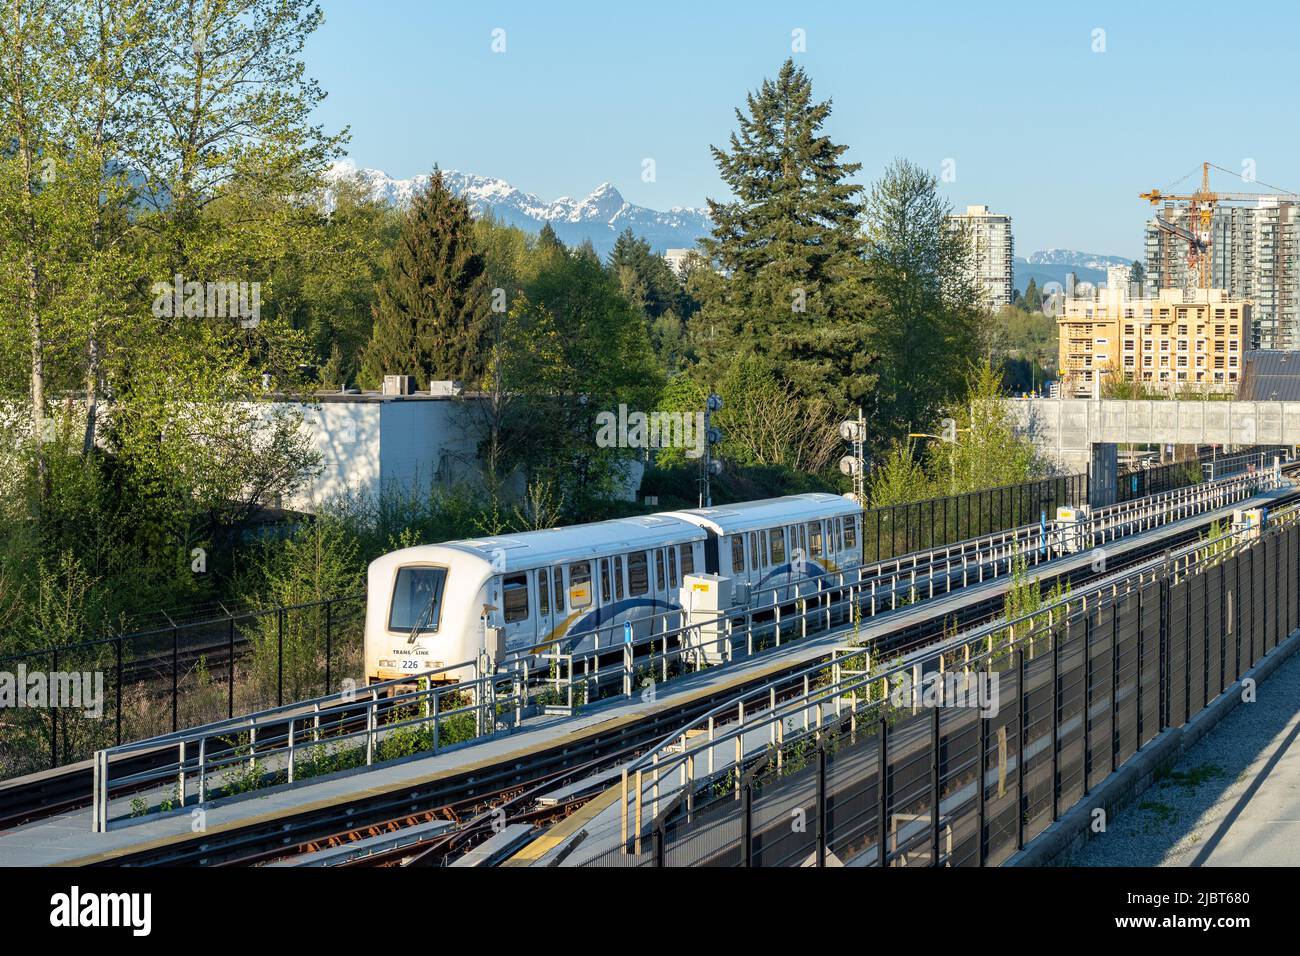 Millennium Line SkyTrain. Moody Centre station. City skyline and nature landscape in the background. Urban transportation concept. Stock Photo